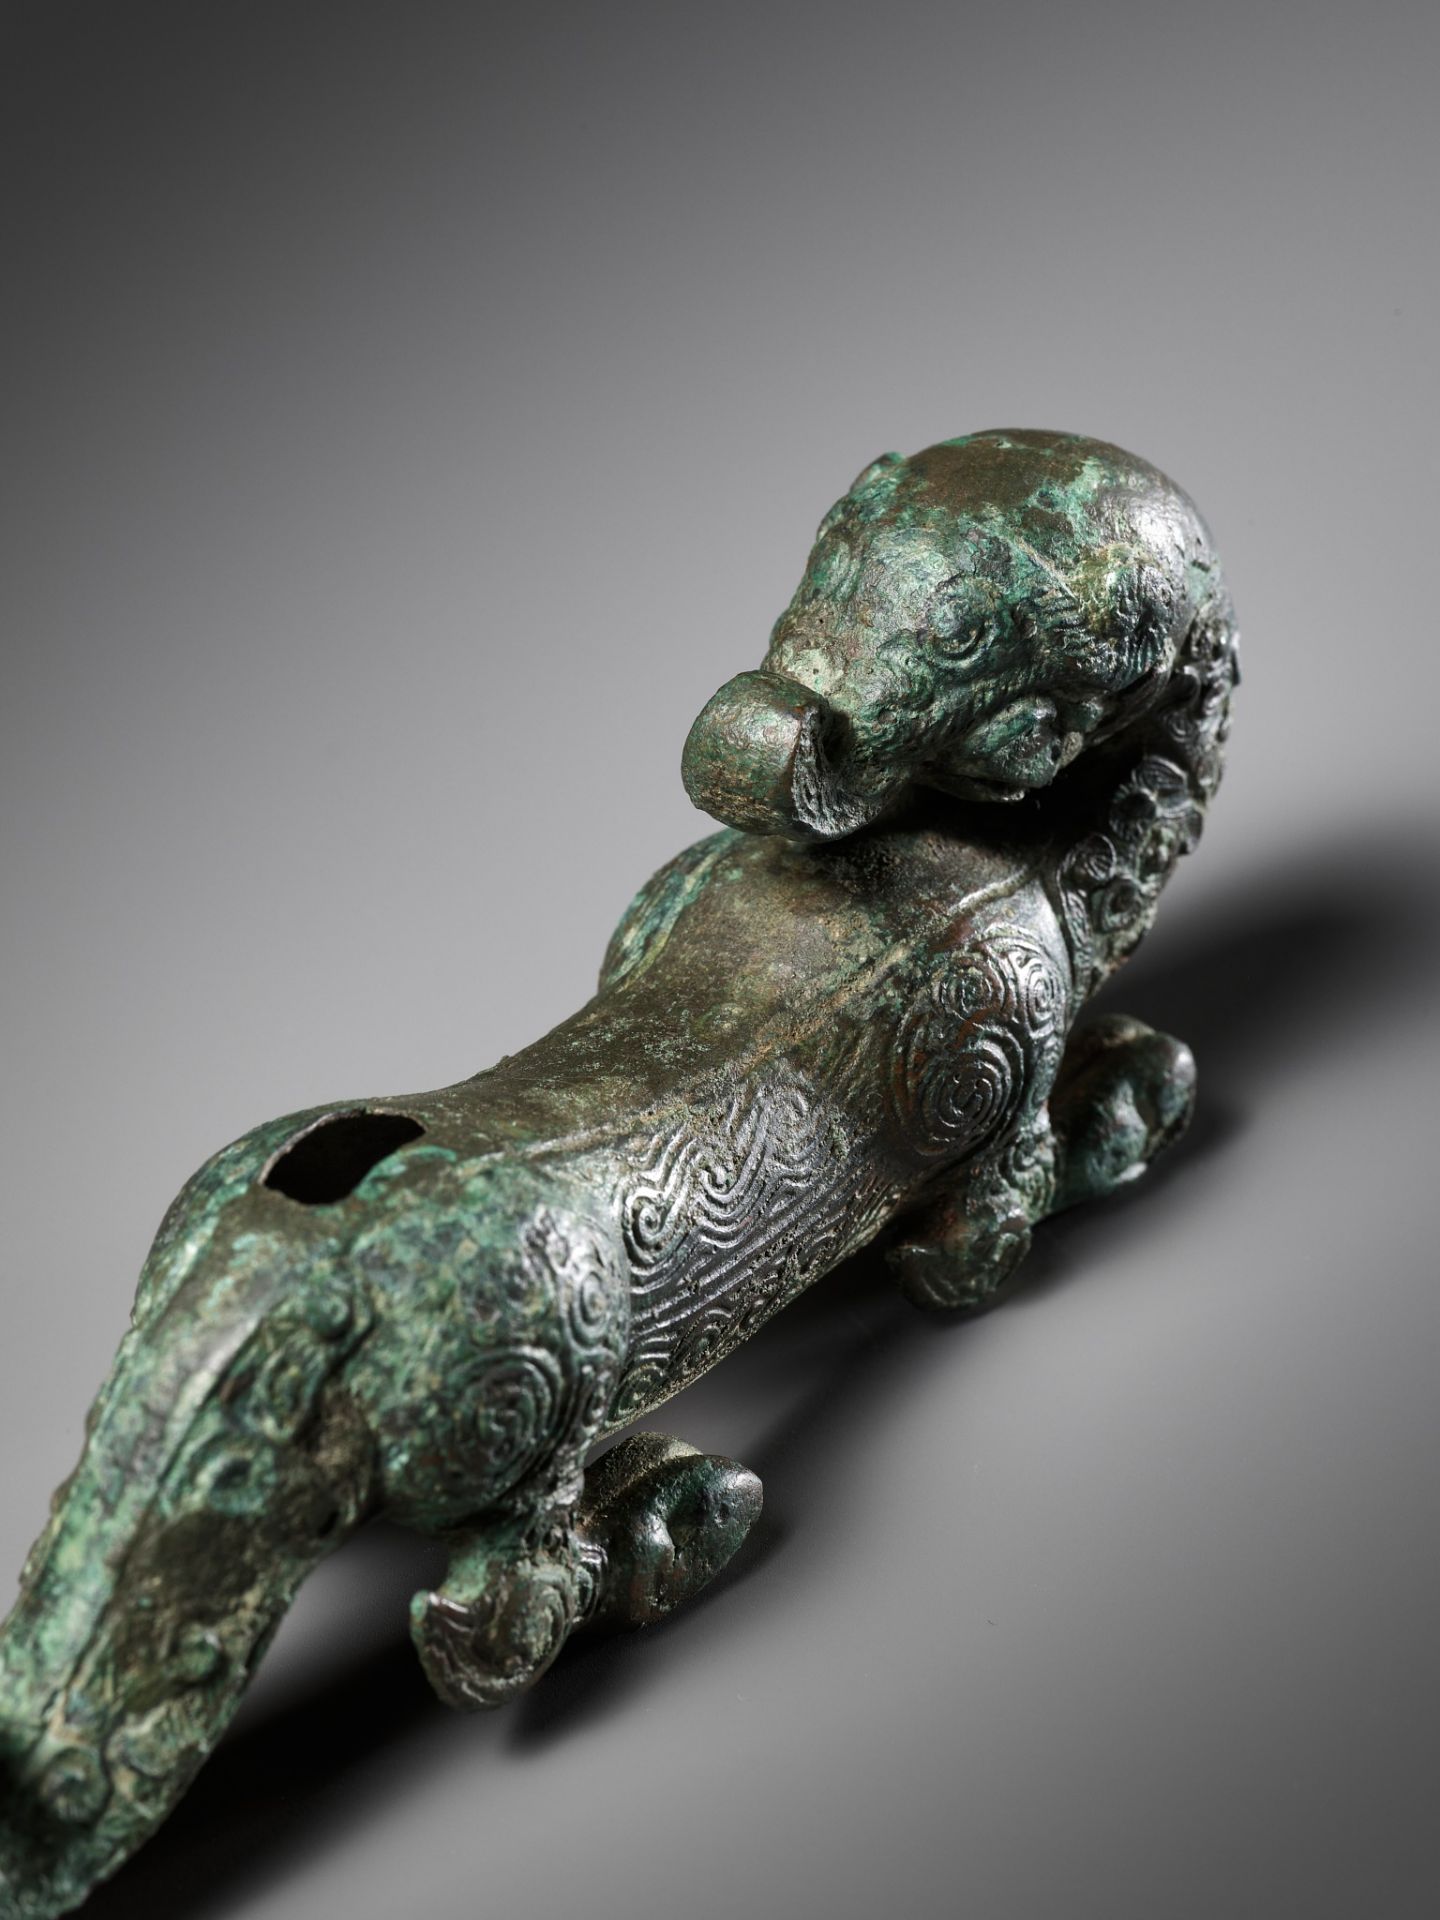 A SUPERB BRONZE FIGURE OF A DRAGON, EASTERN ZHOU DYNASTY, CHINA, 770-256 BC - Image 25 of 25